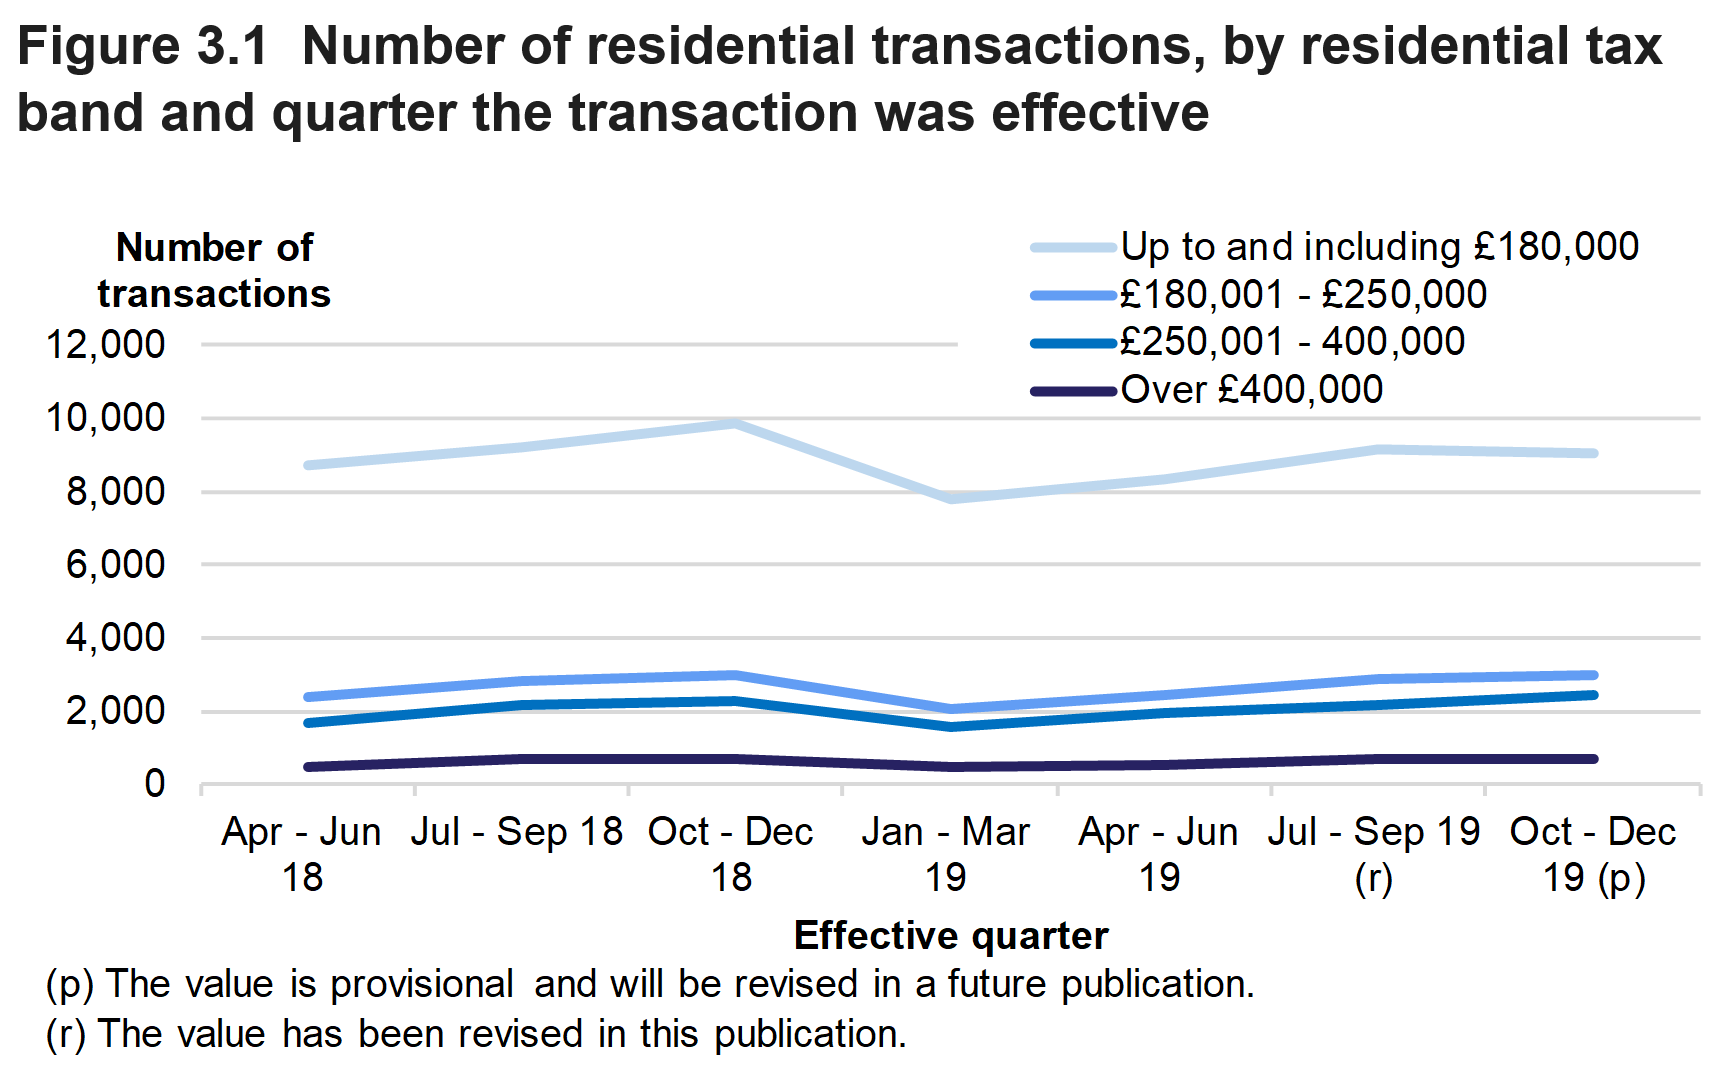 Figure 3.1 shows the number of residential transactions, by residential tax band and quarter the transaction was effective.